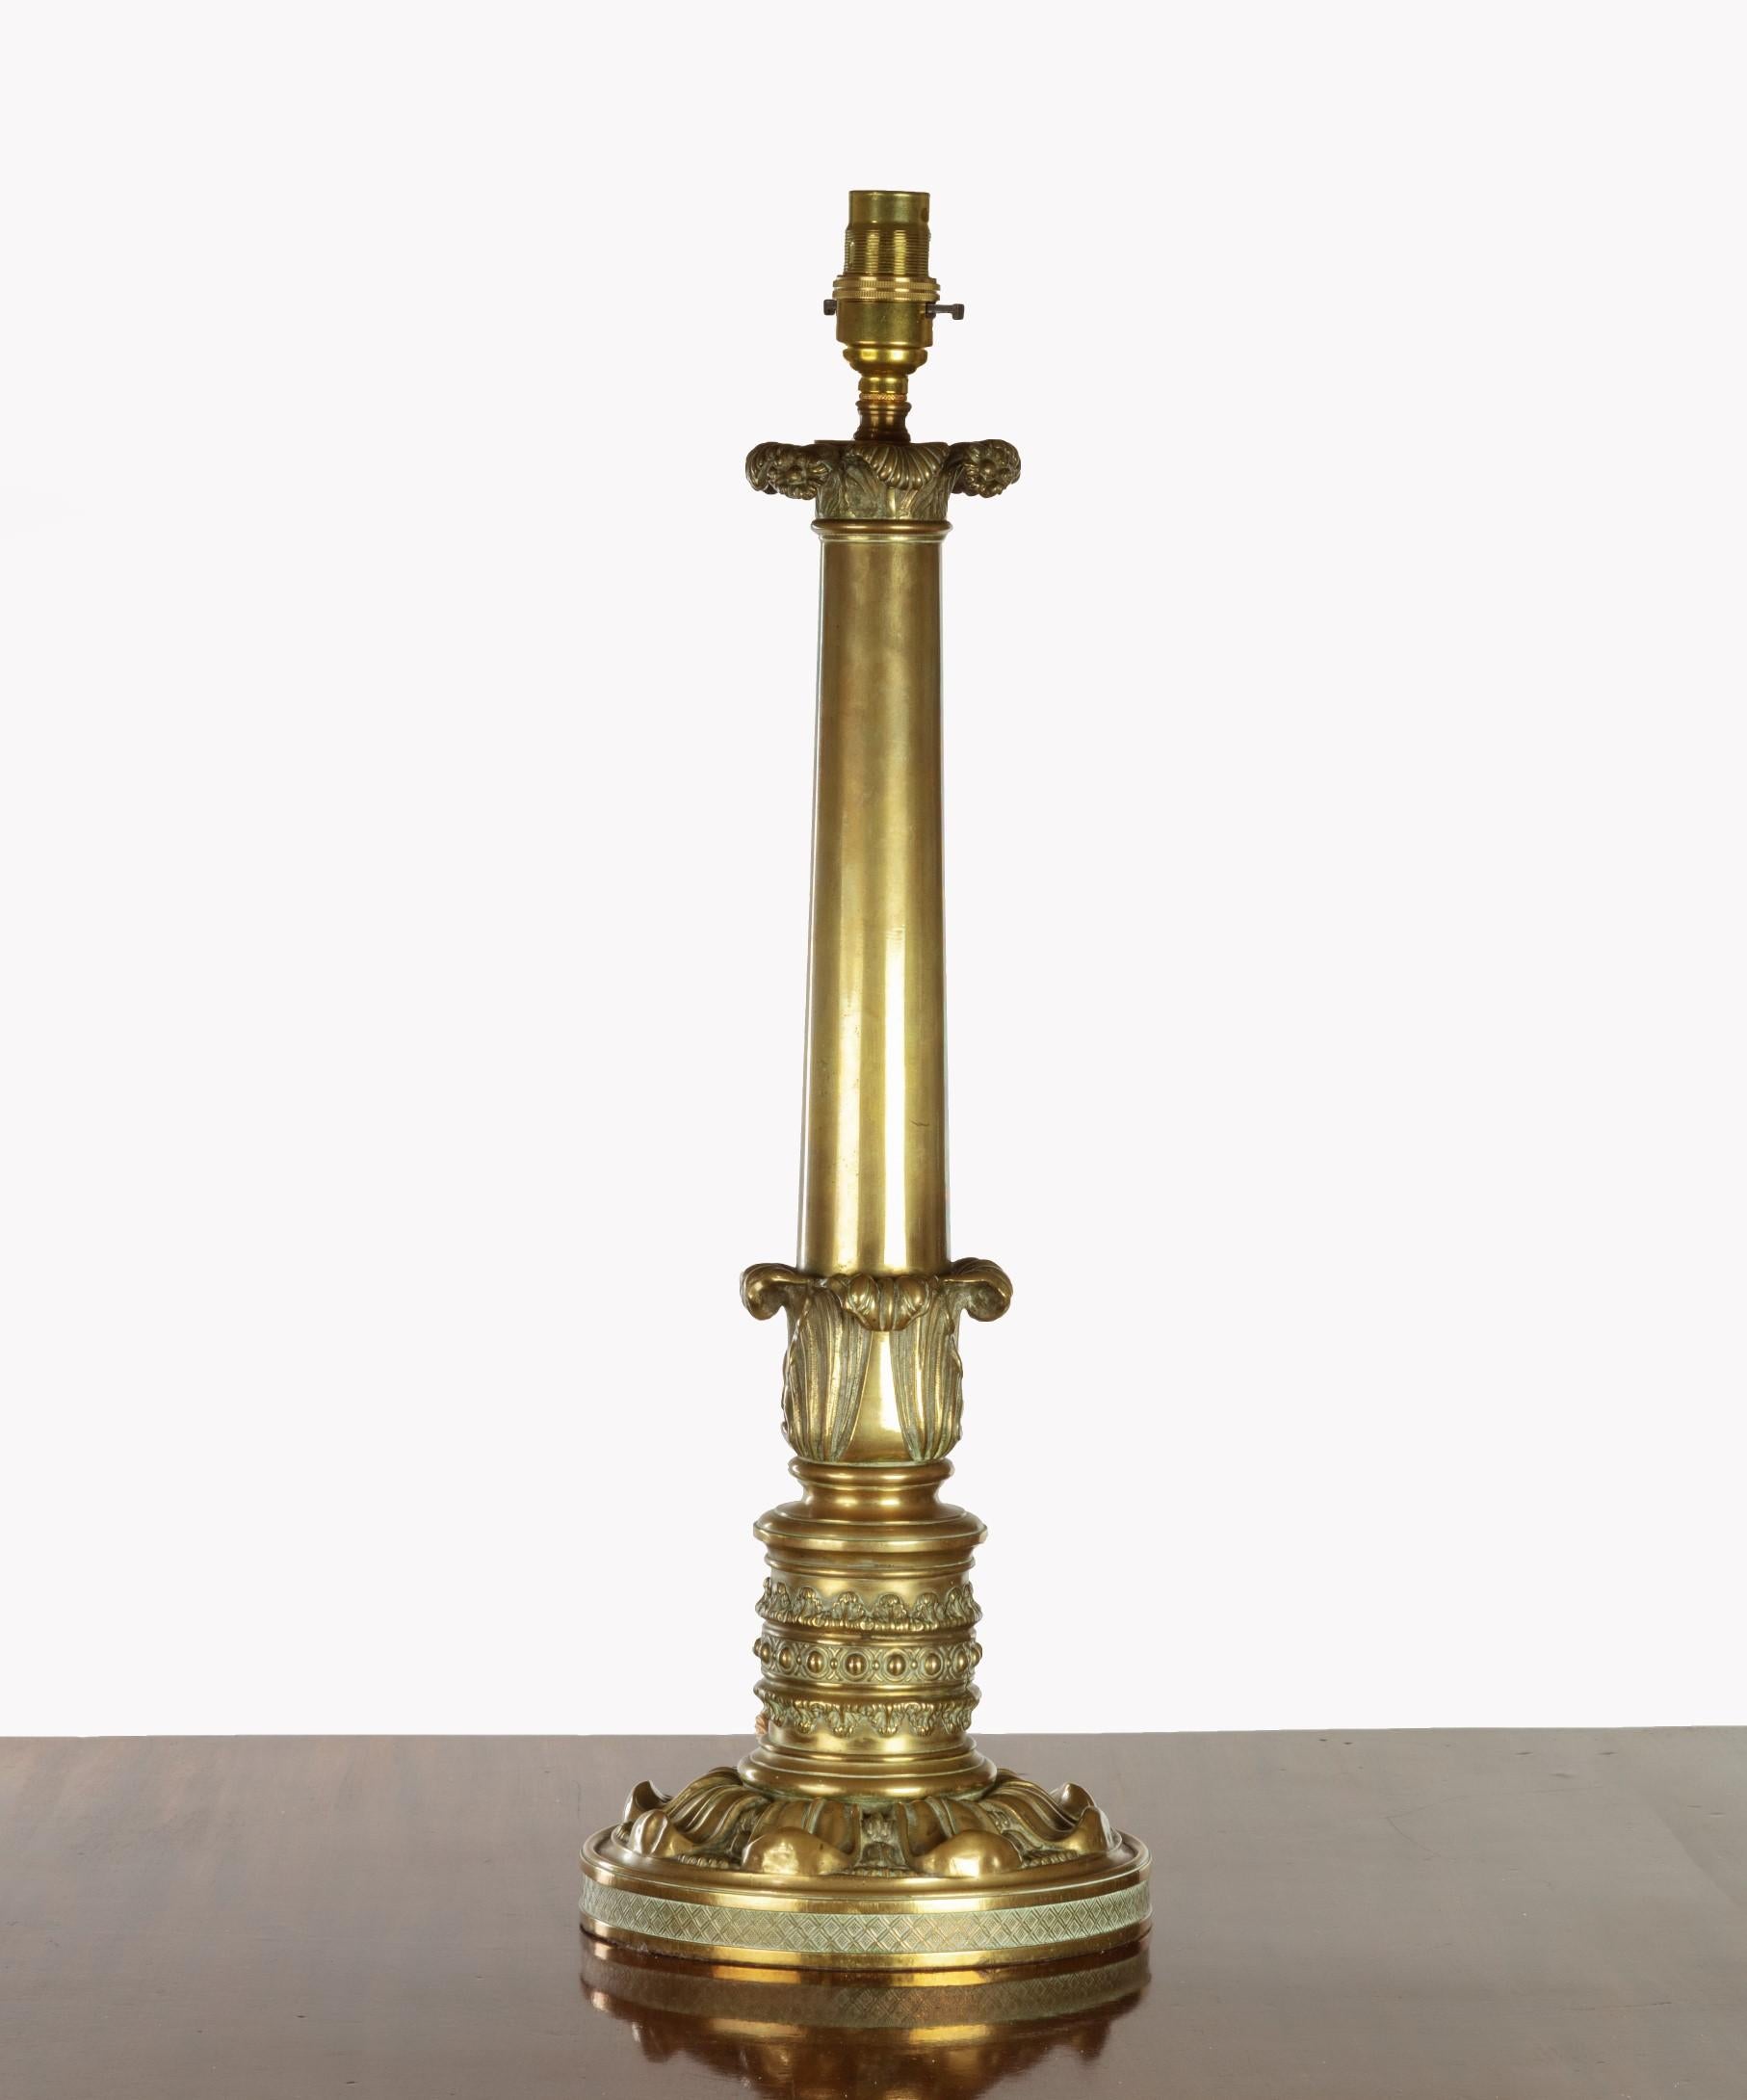 A fine Regency period brass table lamp, the lamp holder above an acanthus capital and further acanthus decoration to the stem, the base decorated with scrolling lotus leaves. Professionally electrified and tested for UK current. The lamp has a